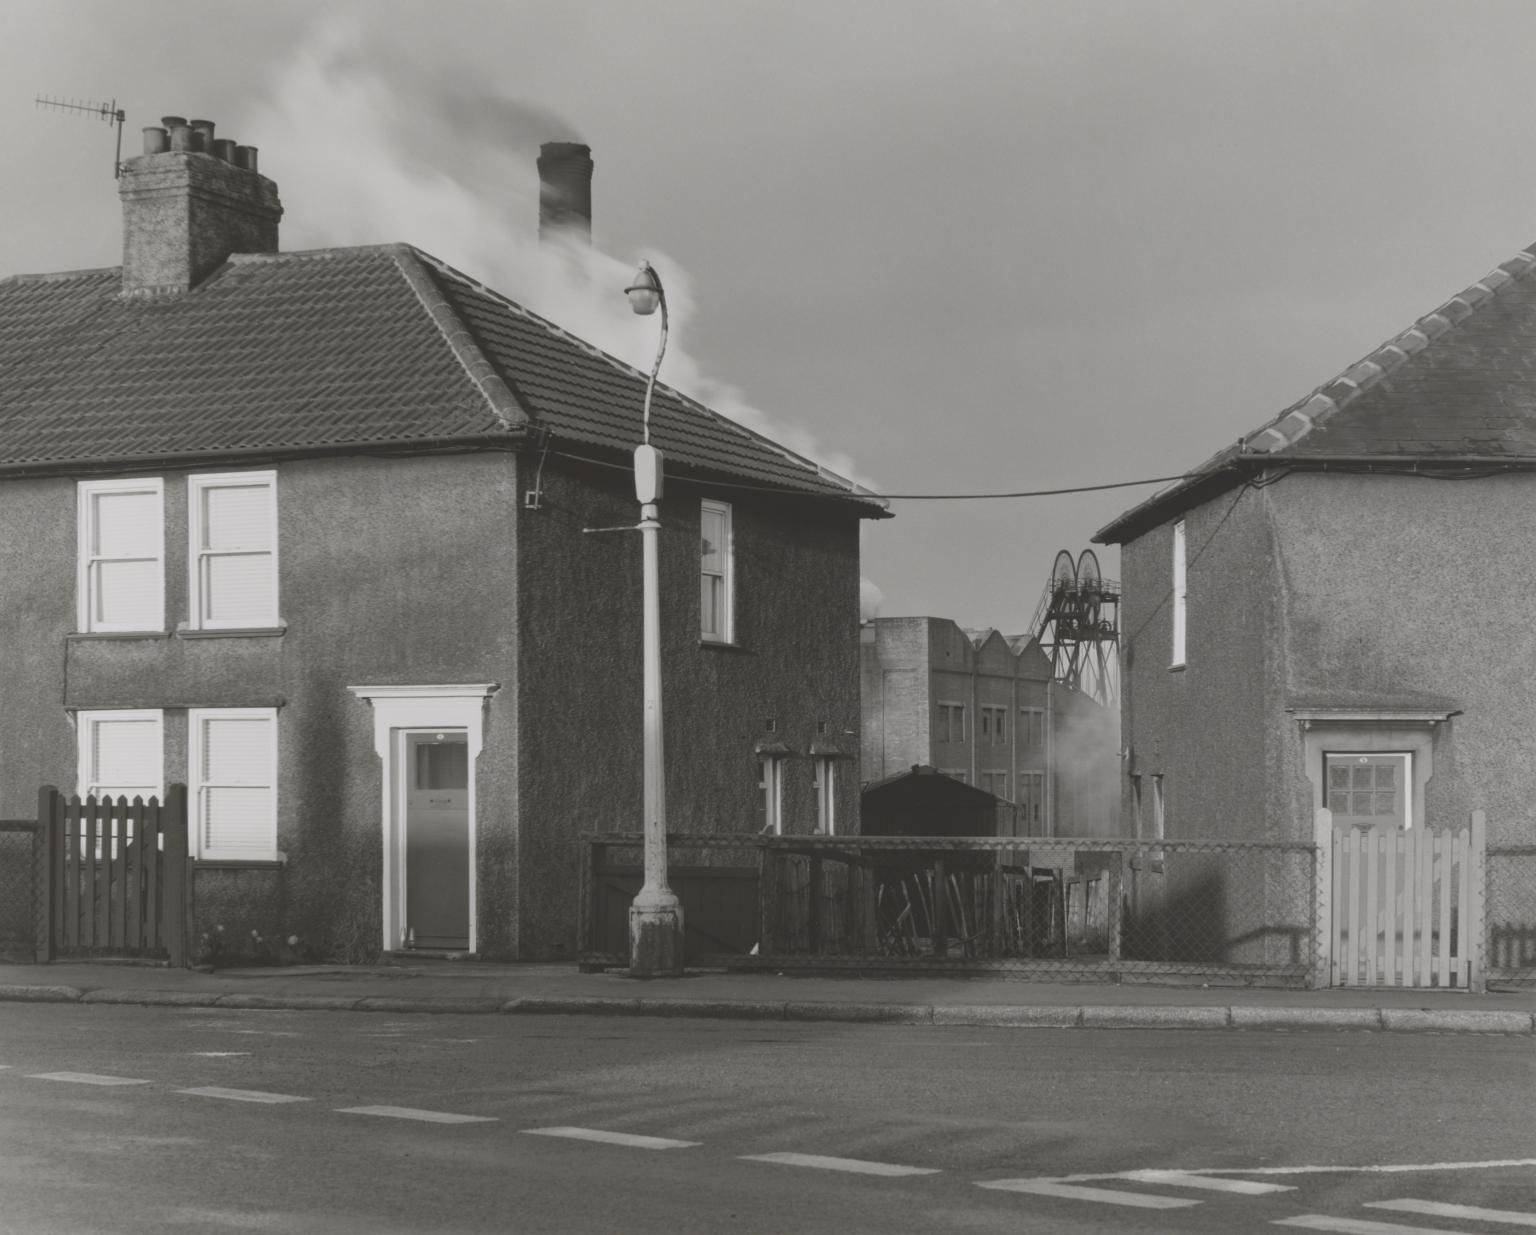 P81021: Houses with Pit Wheel in Background. Workington